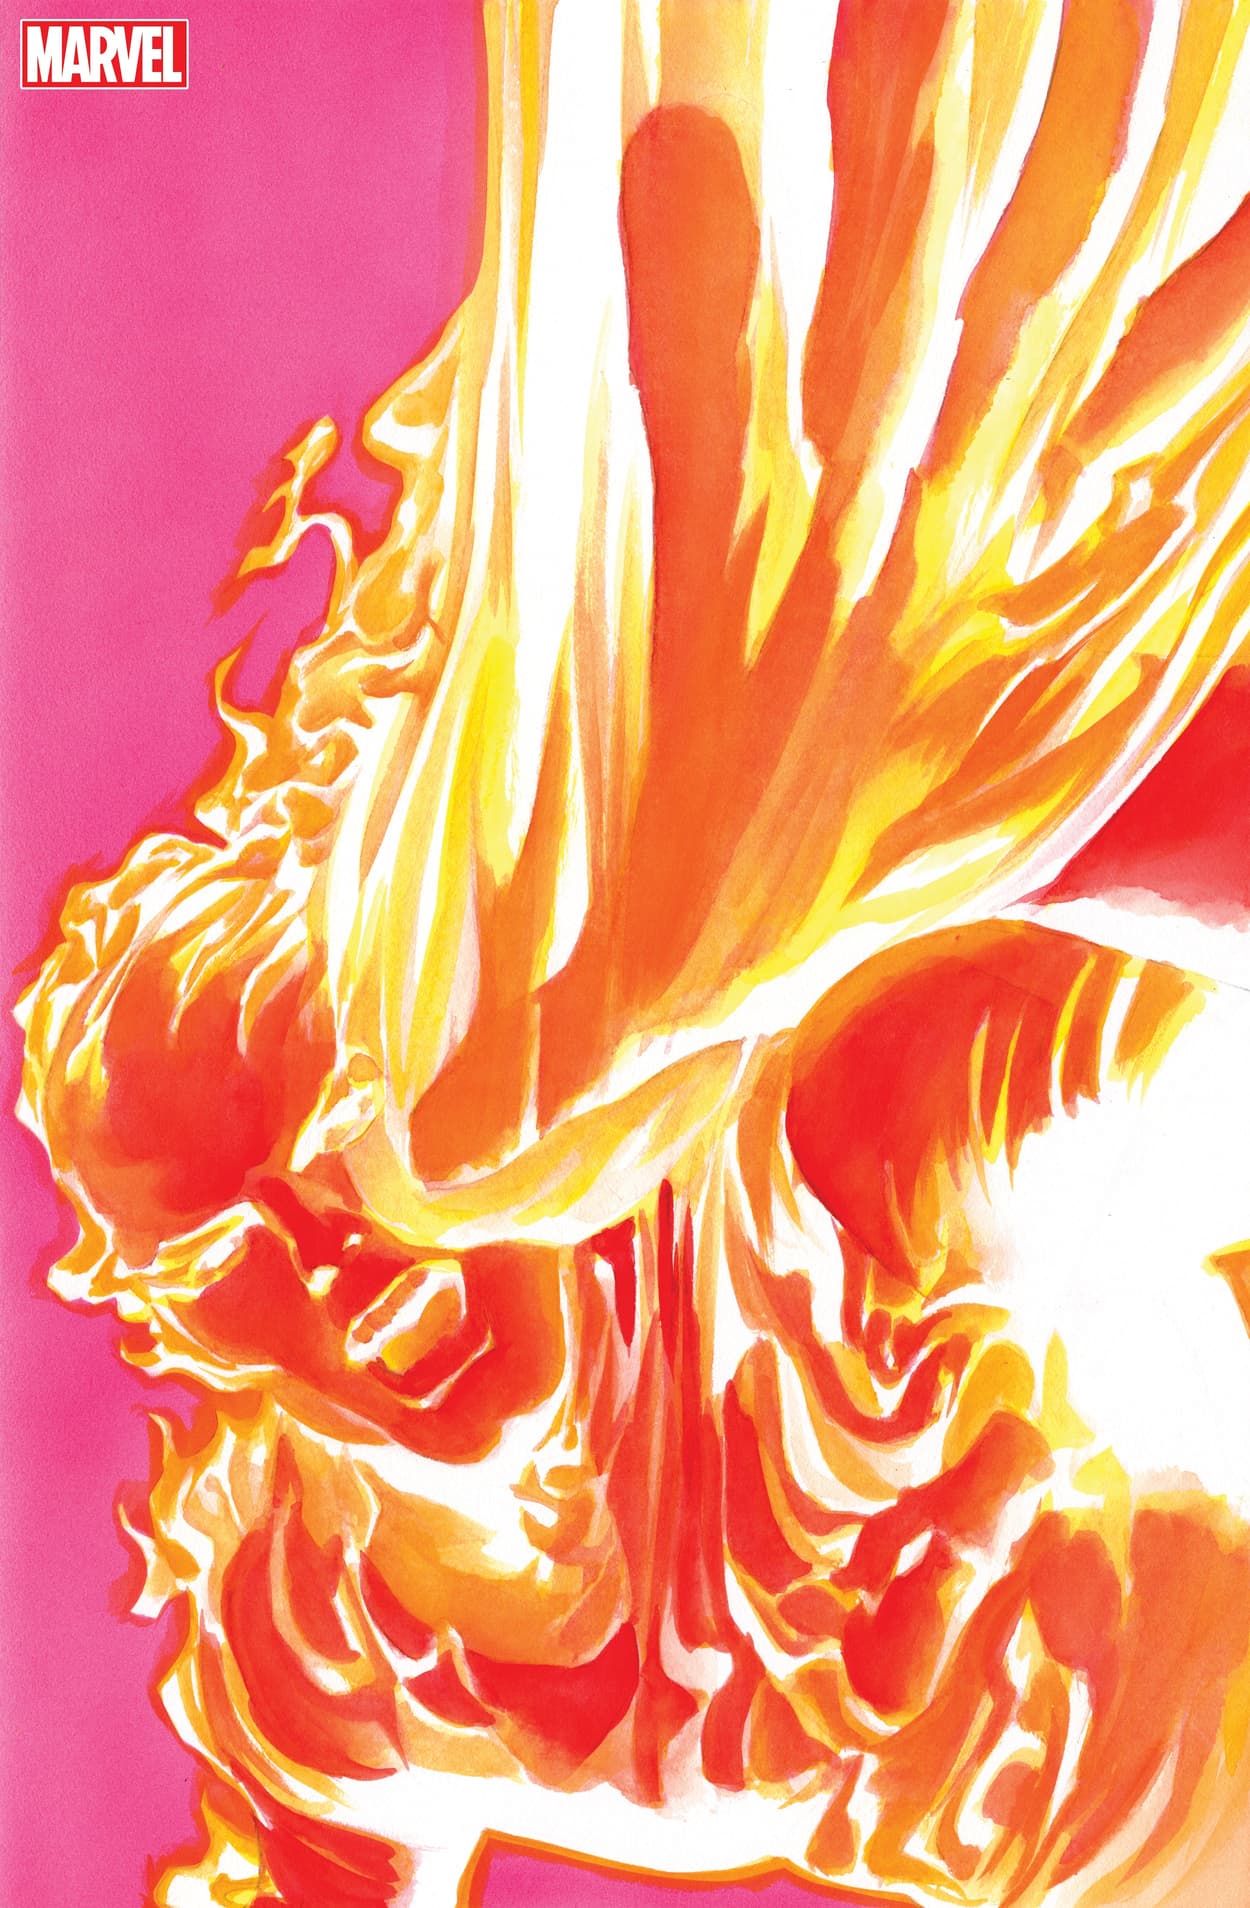 MARVELS SNAPSHOT: FANTASTIC FOUR #1 cover by Alex Ross